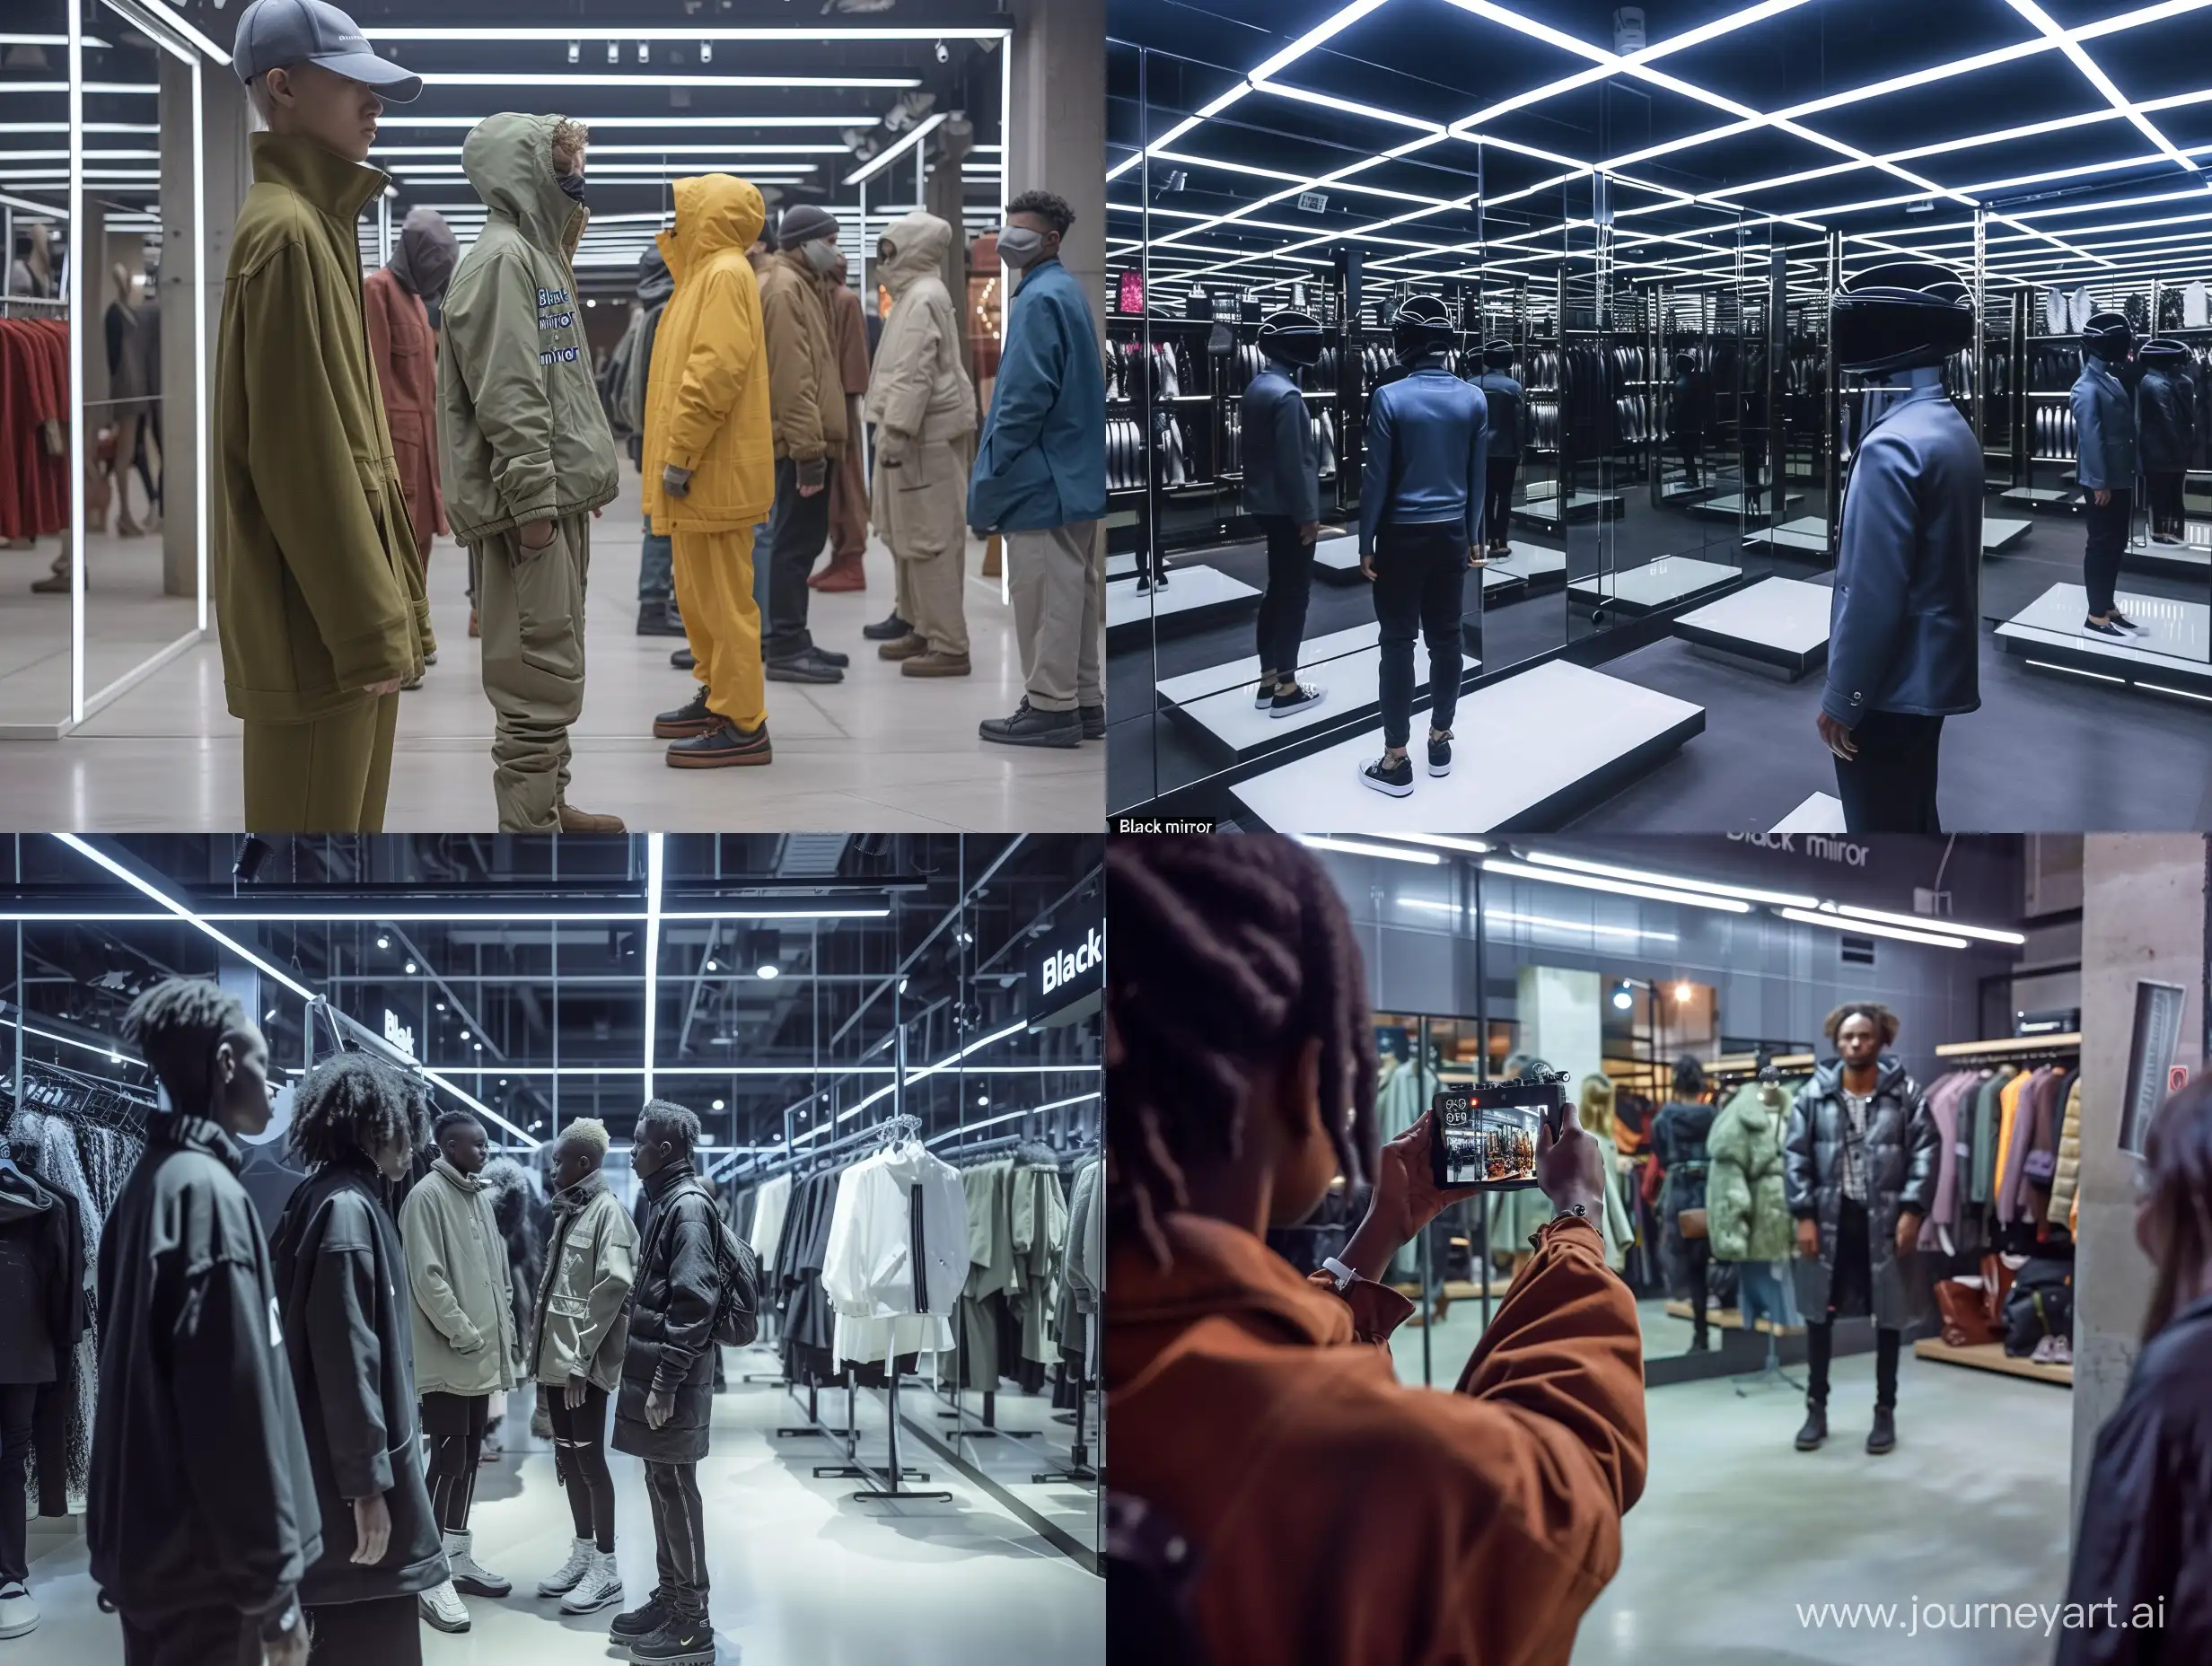 people in the fashion store collaboration between fashion brand and retail like in the “Black mirror” series hyper realistic photo